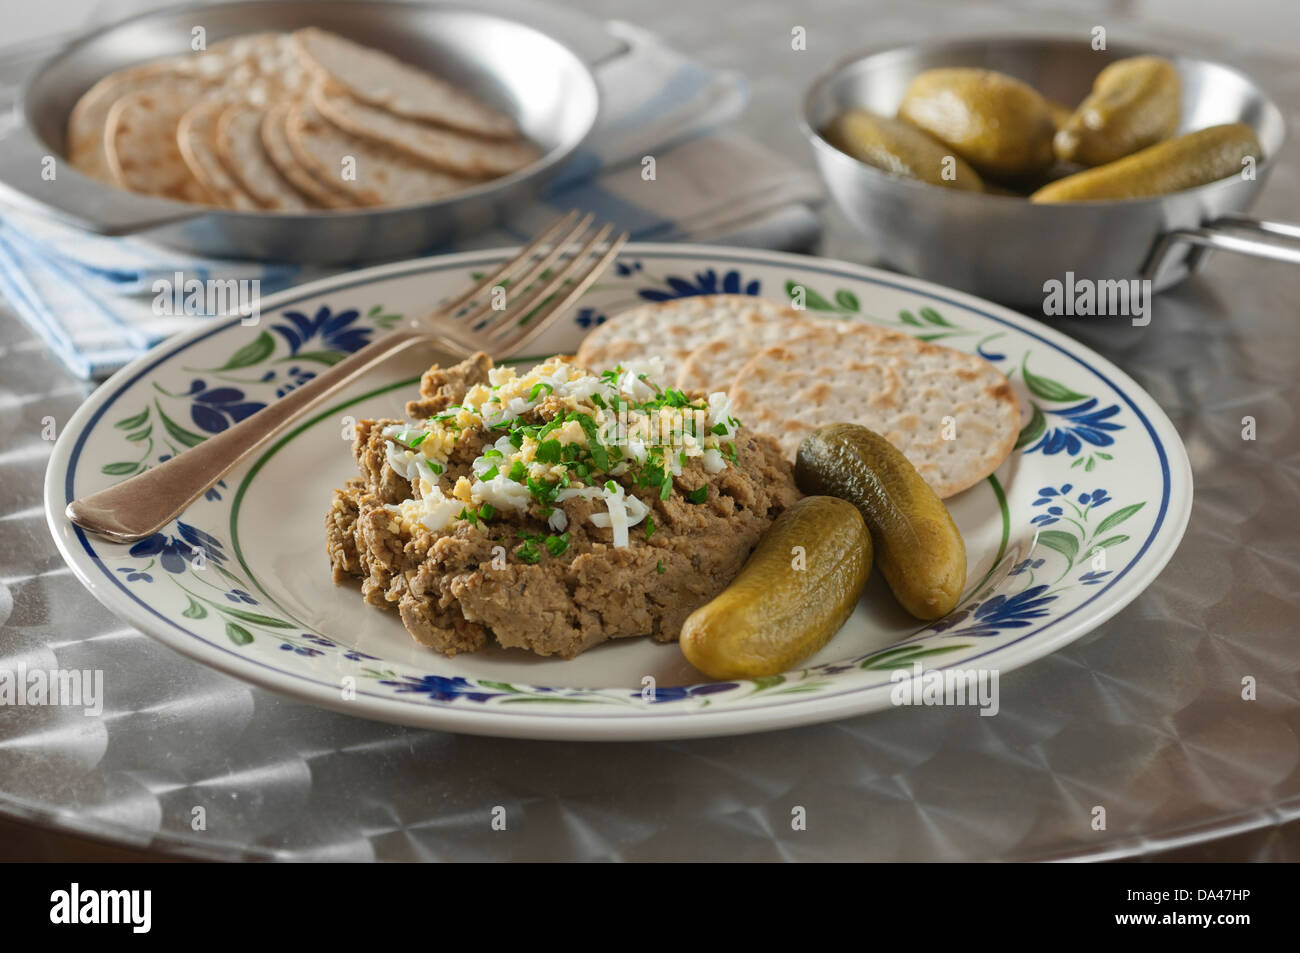 Chopped liver with matzo crackers and pickles Stock Photo